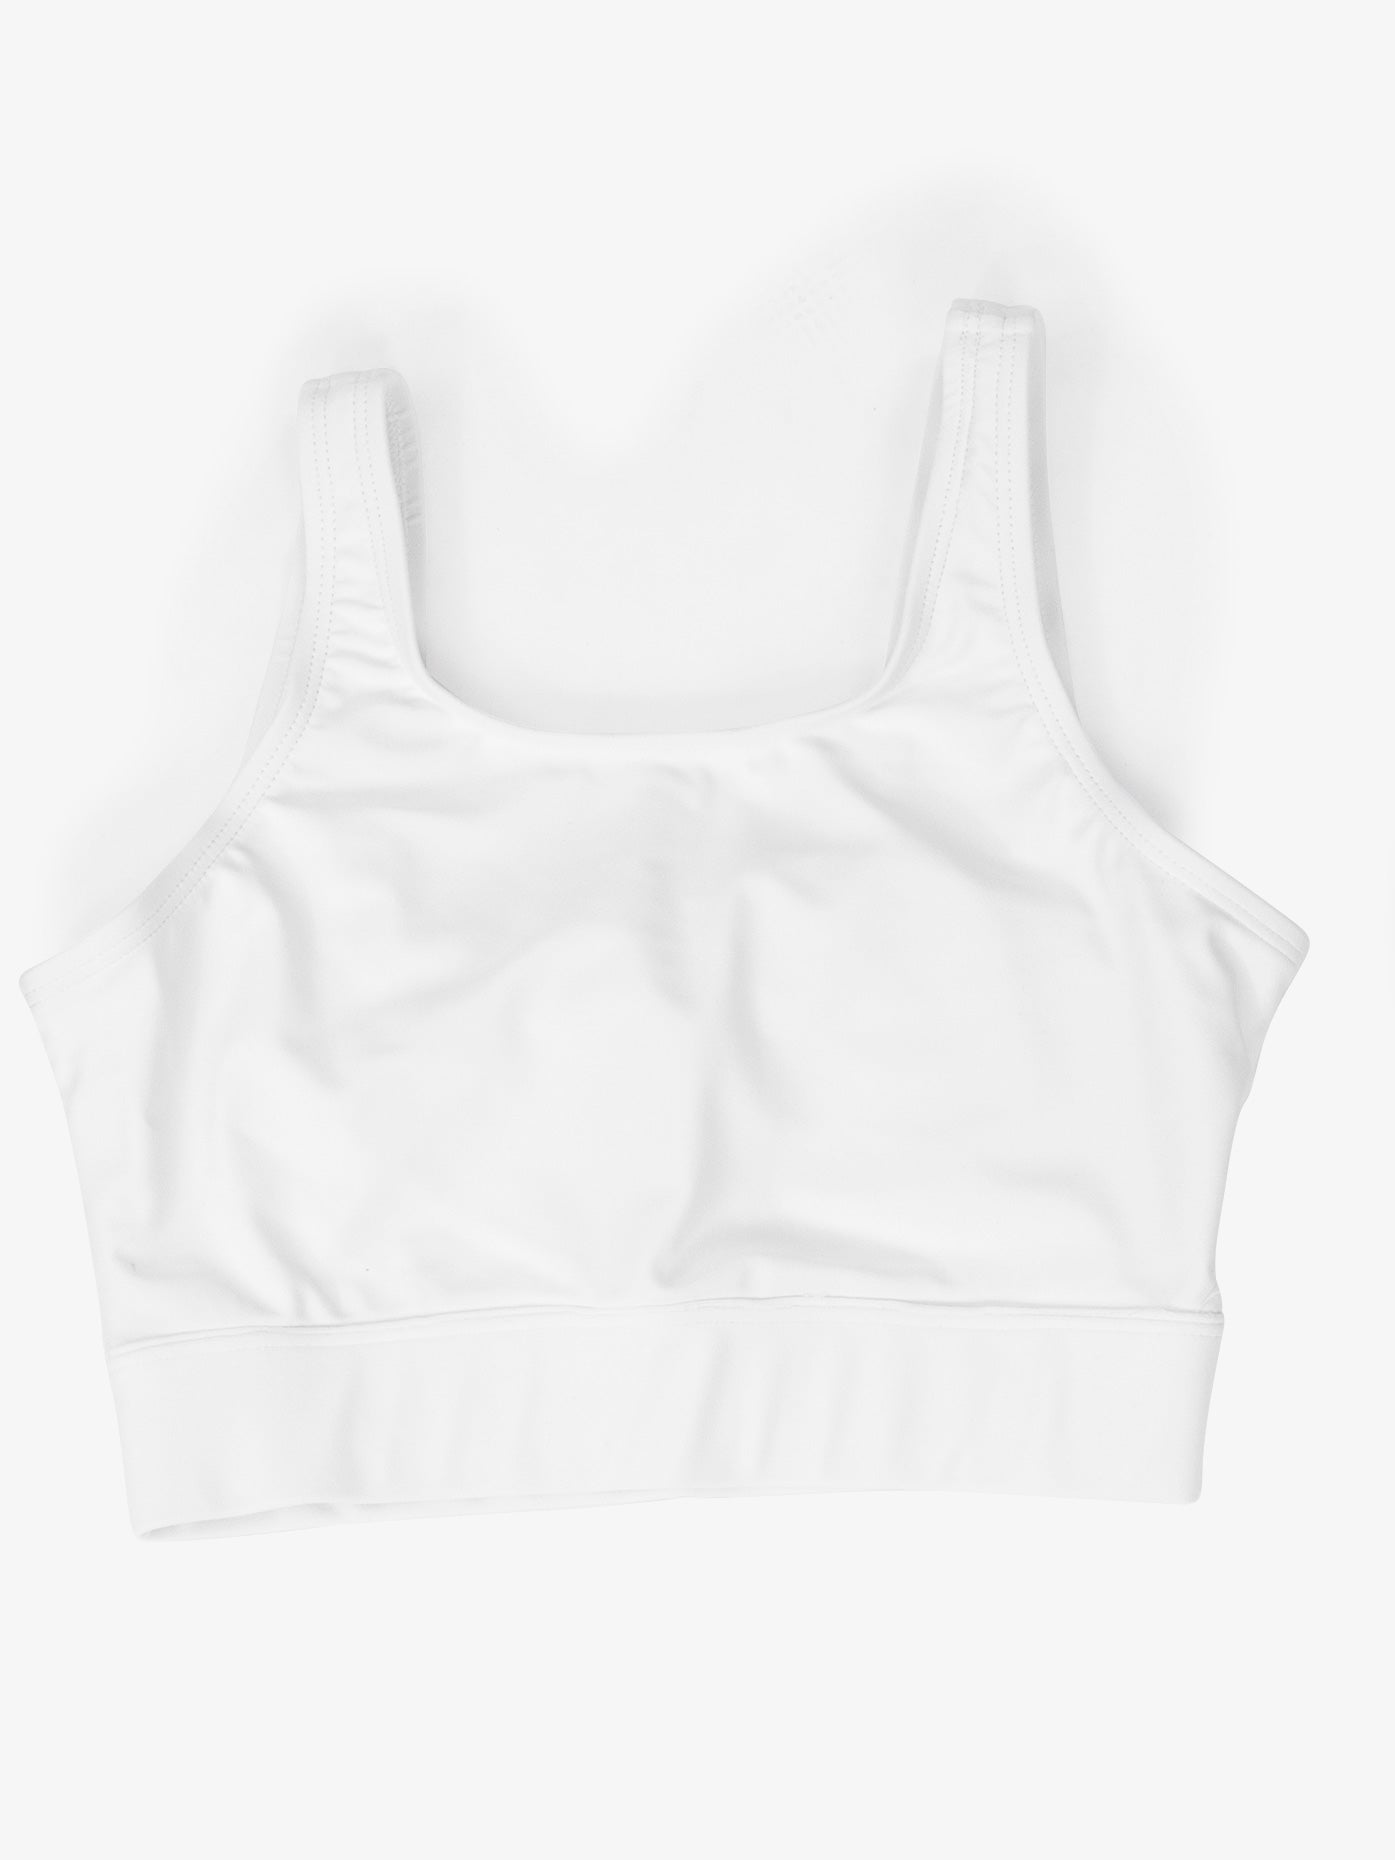 Girl's pinched back white bra top